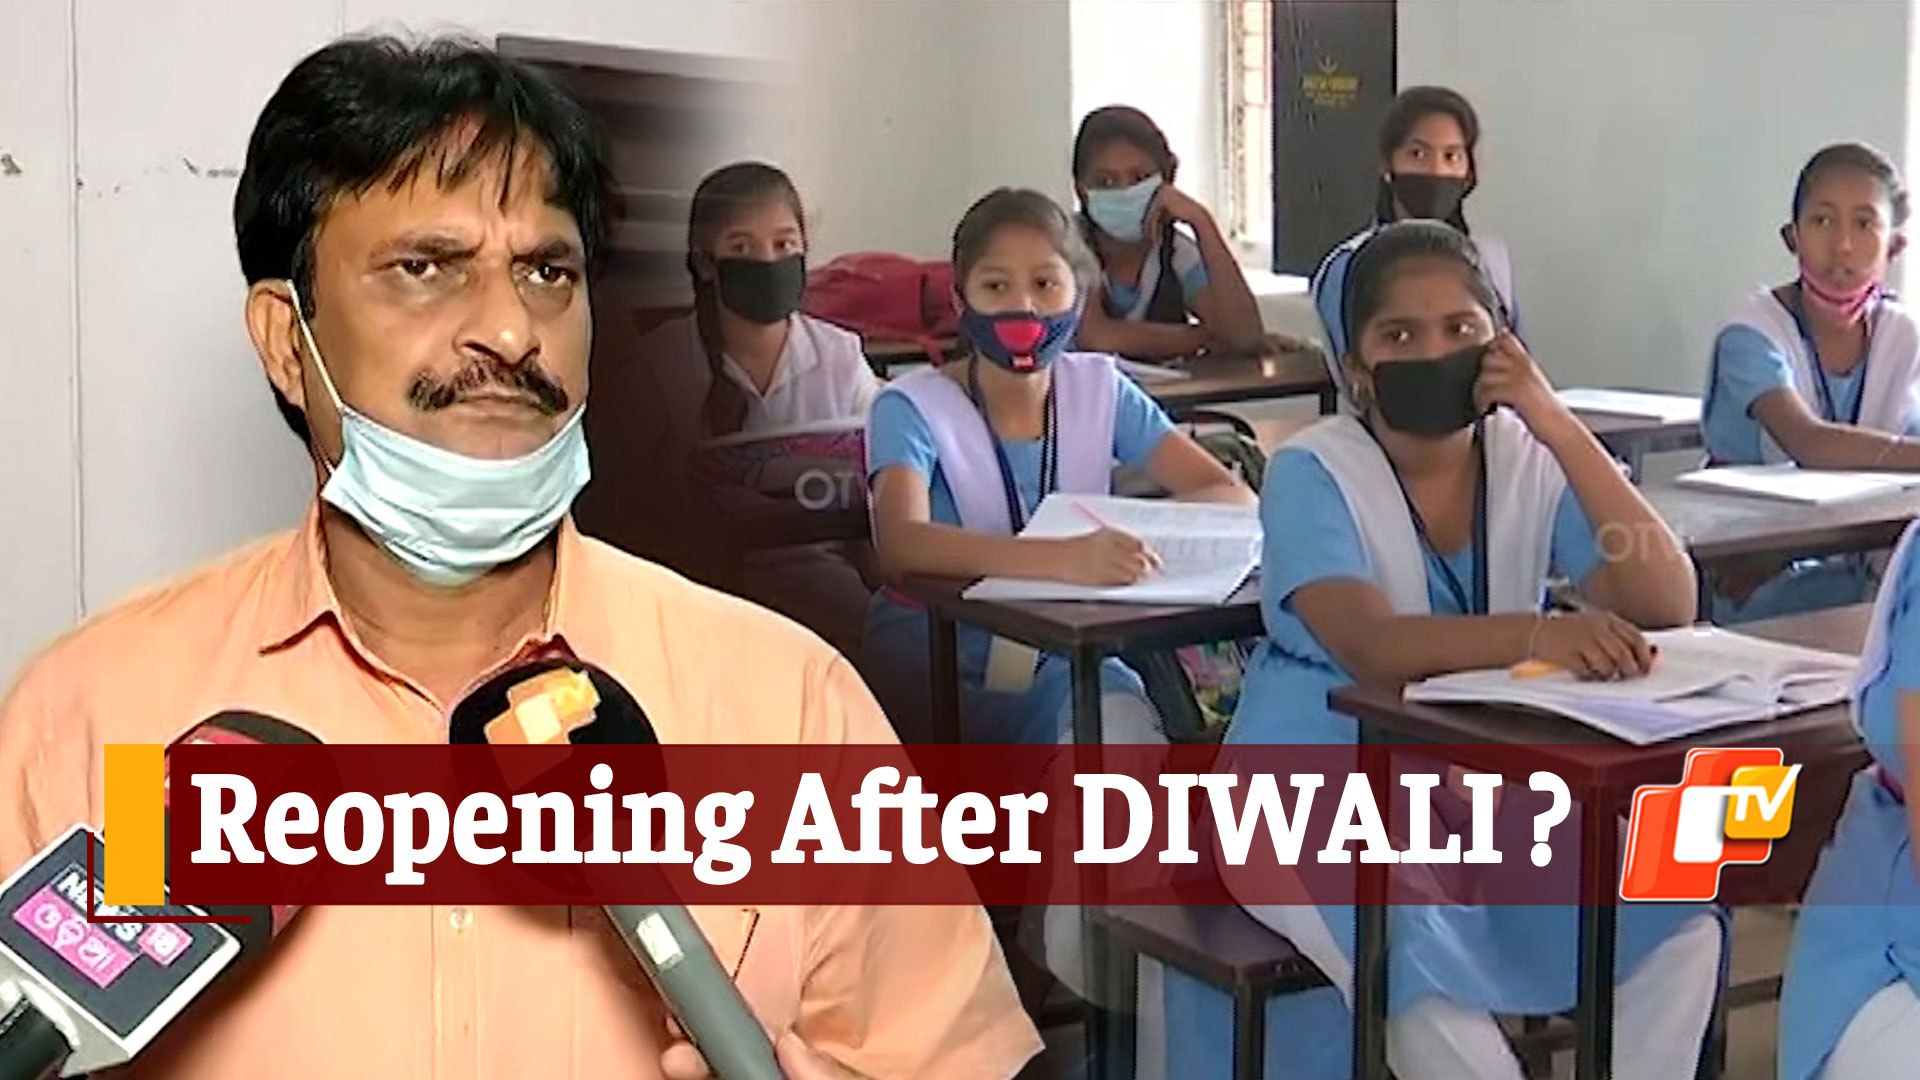 Odisha Schools To Reopen For All After Diwali! Check Latest Updates On Offline Classes For Class 1-7